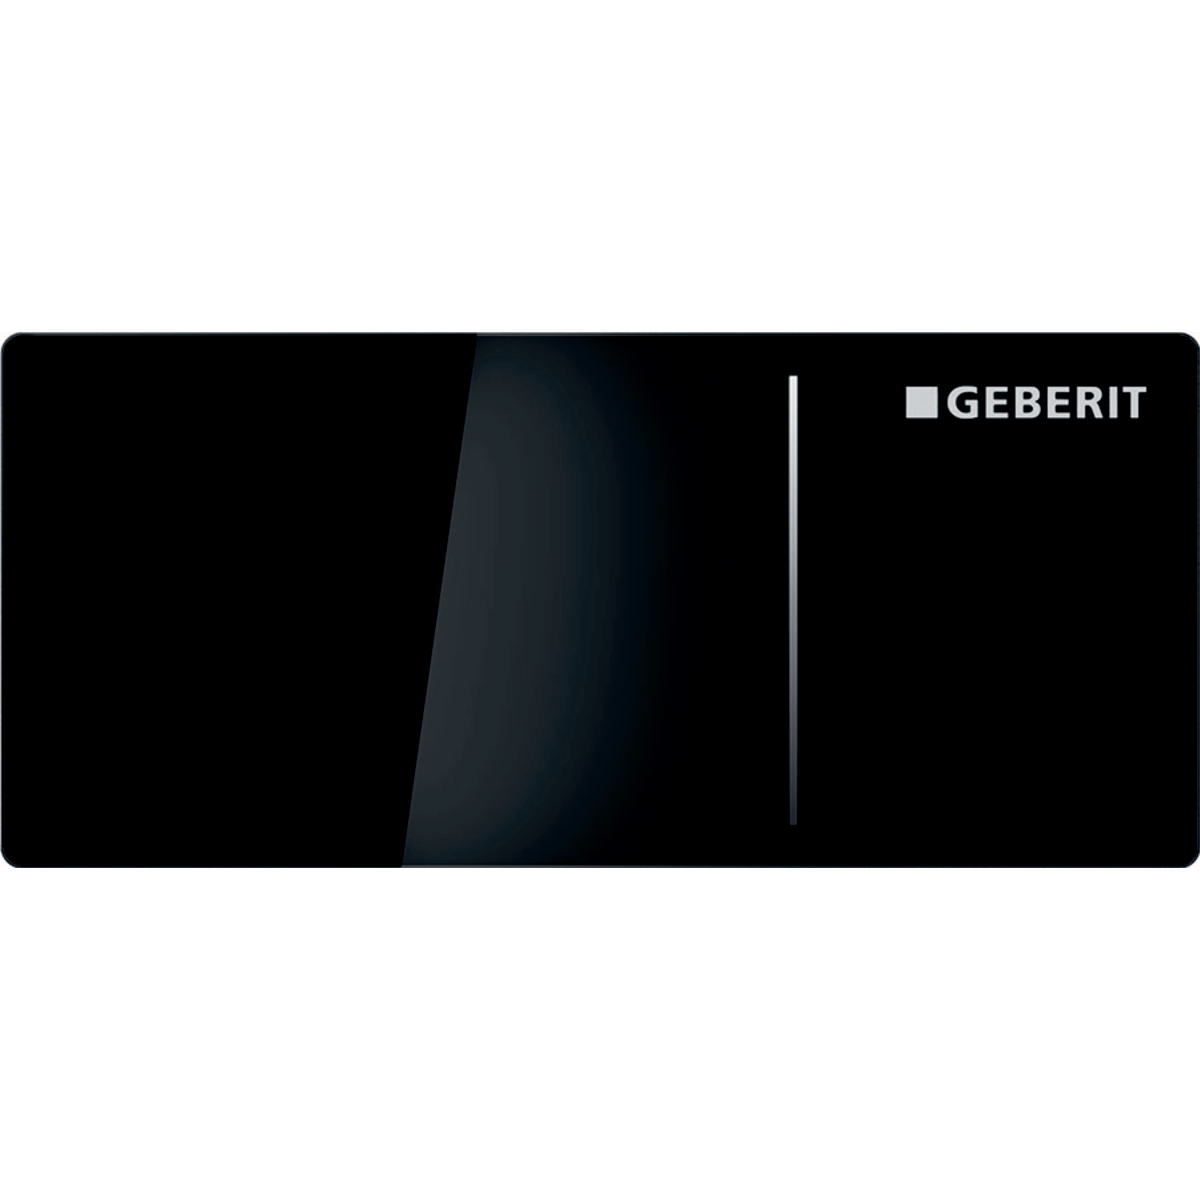 Geberit 115.635.SJ.1 Remote Flush Actuation Type 70 for Dual Flush, for Sigma Concealed Cistern 8 Cm - Black Glass